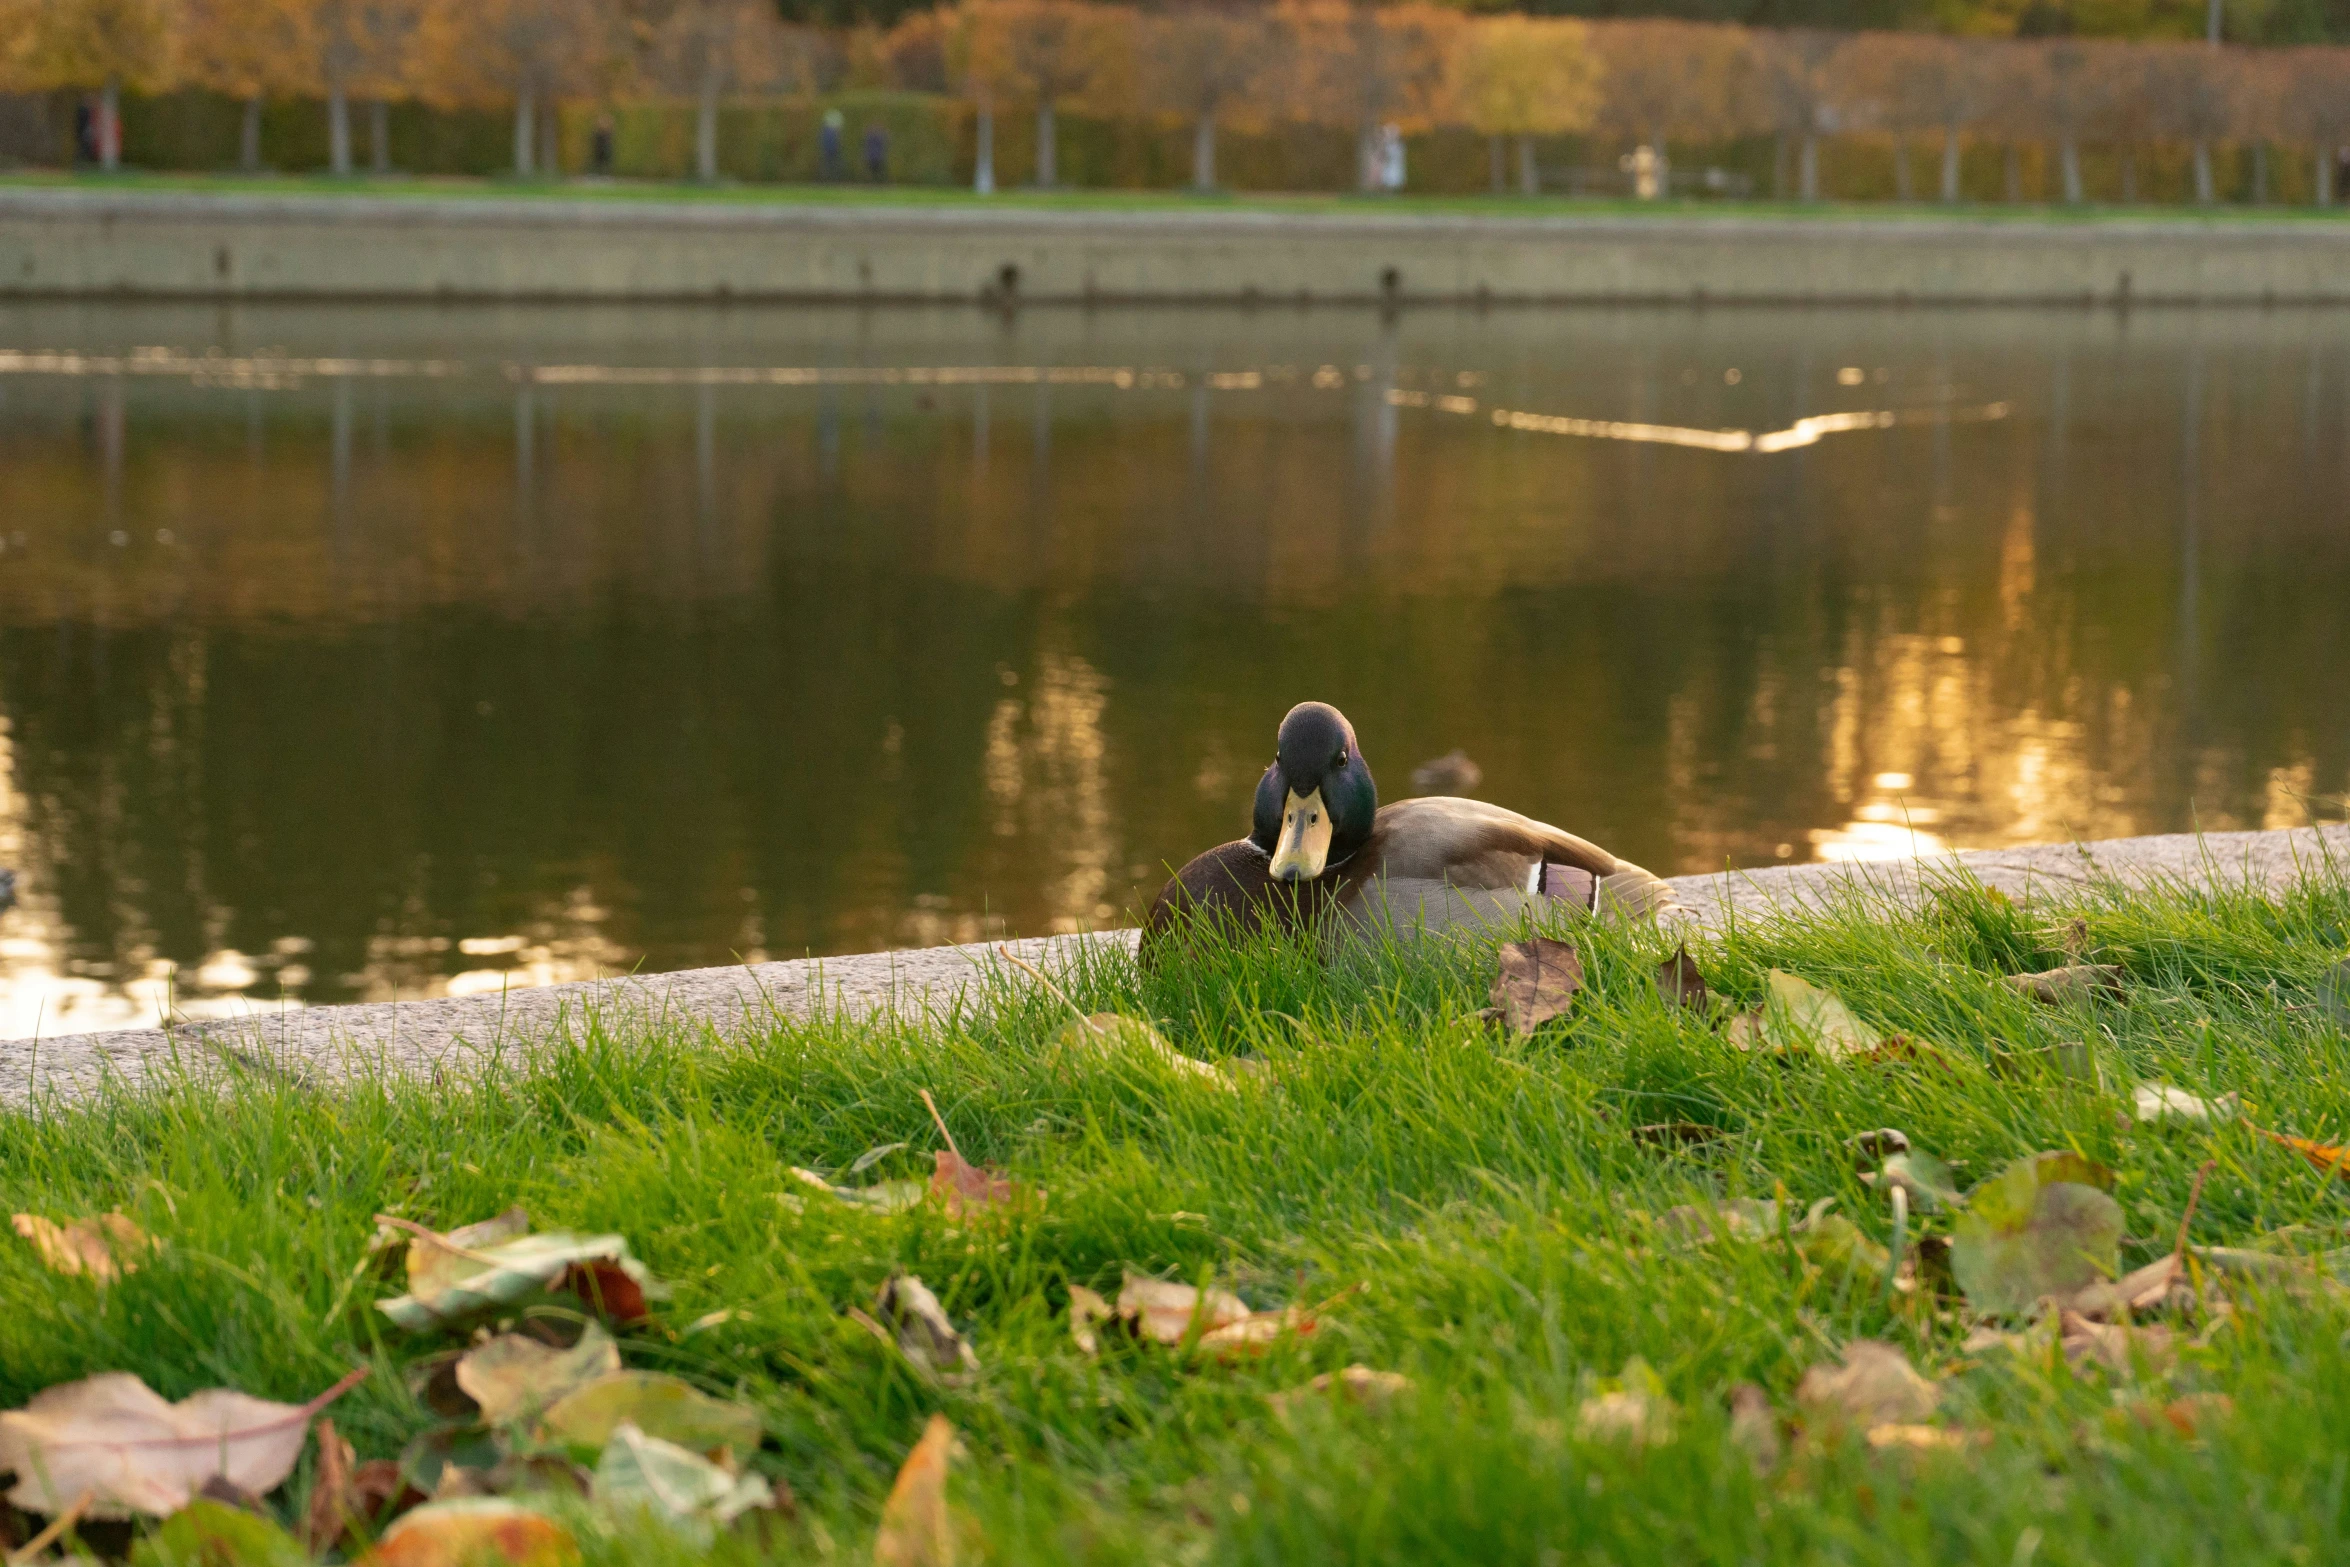 two ducks sit on the grass by the water